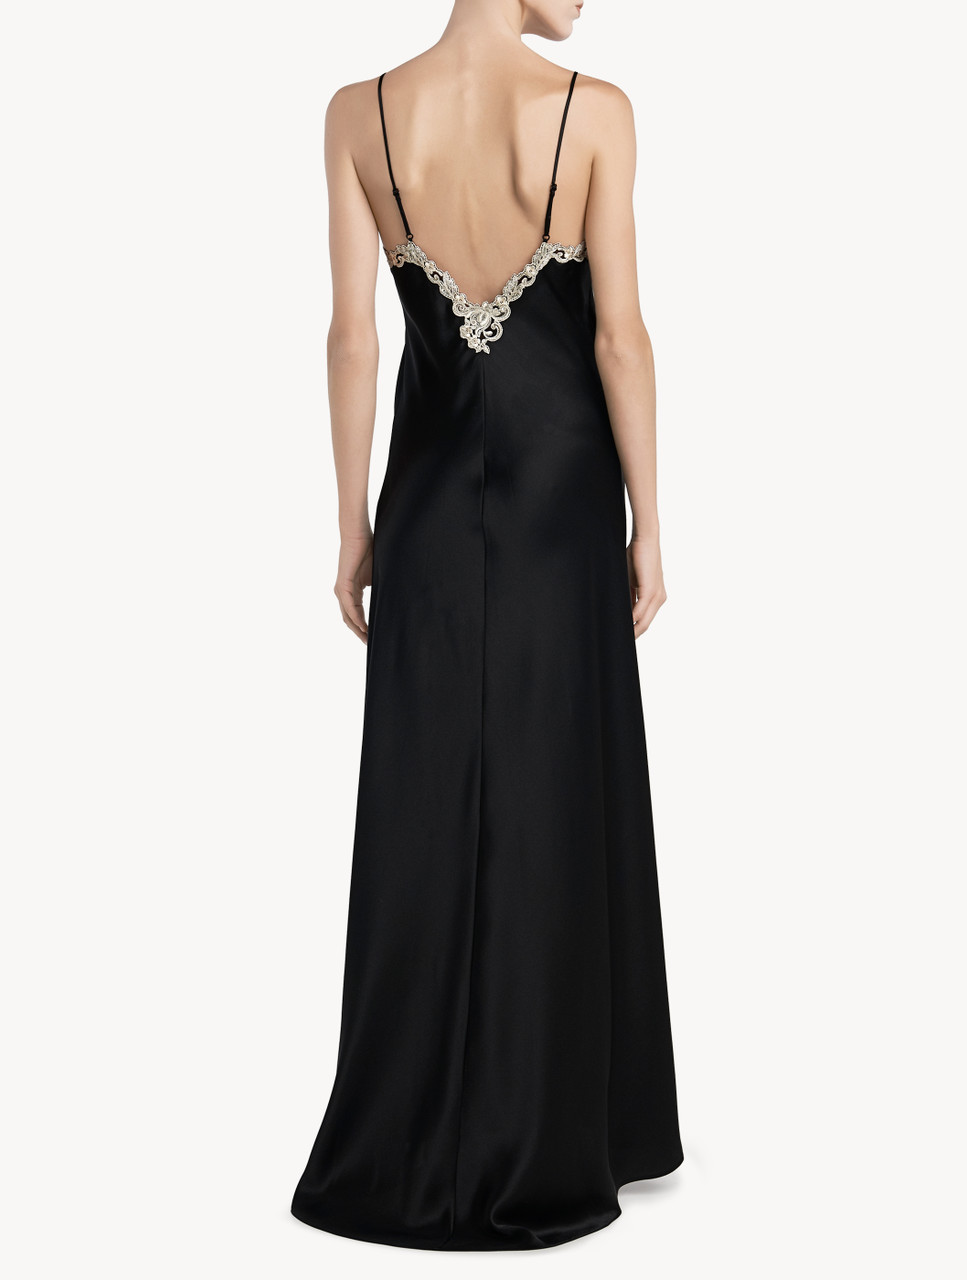 Long nightgown in black with frastaglio